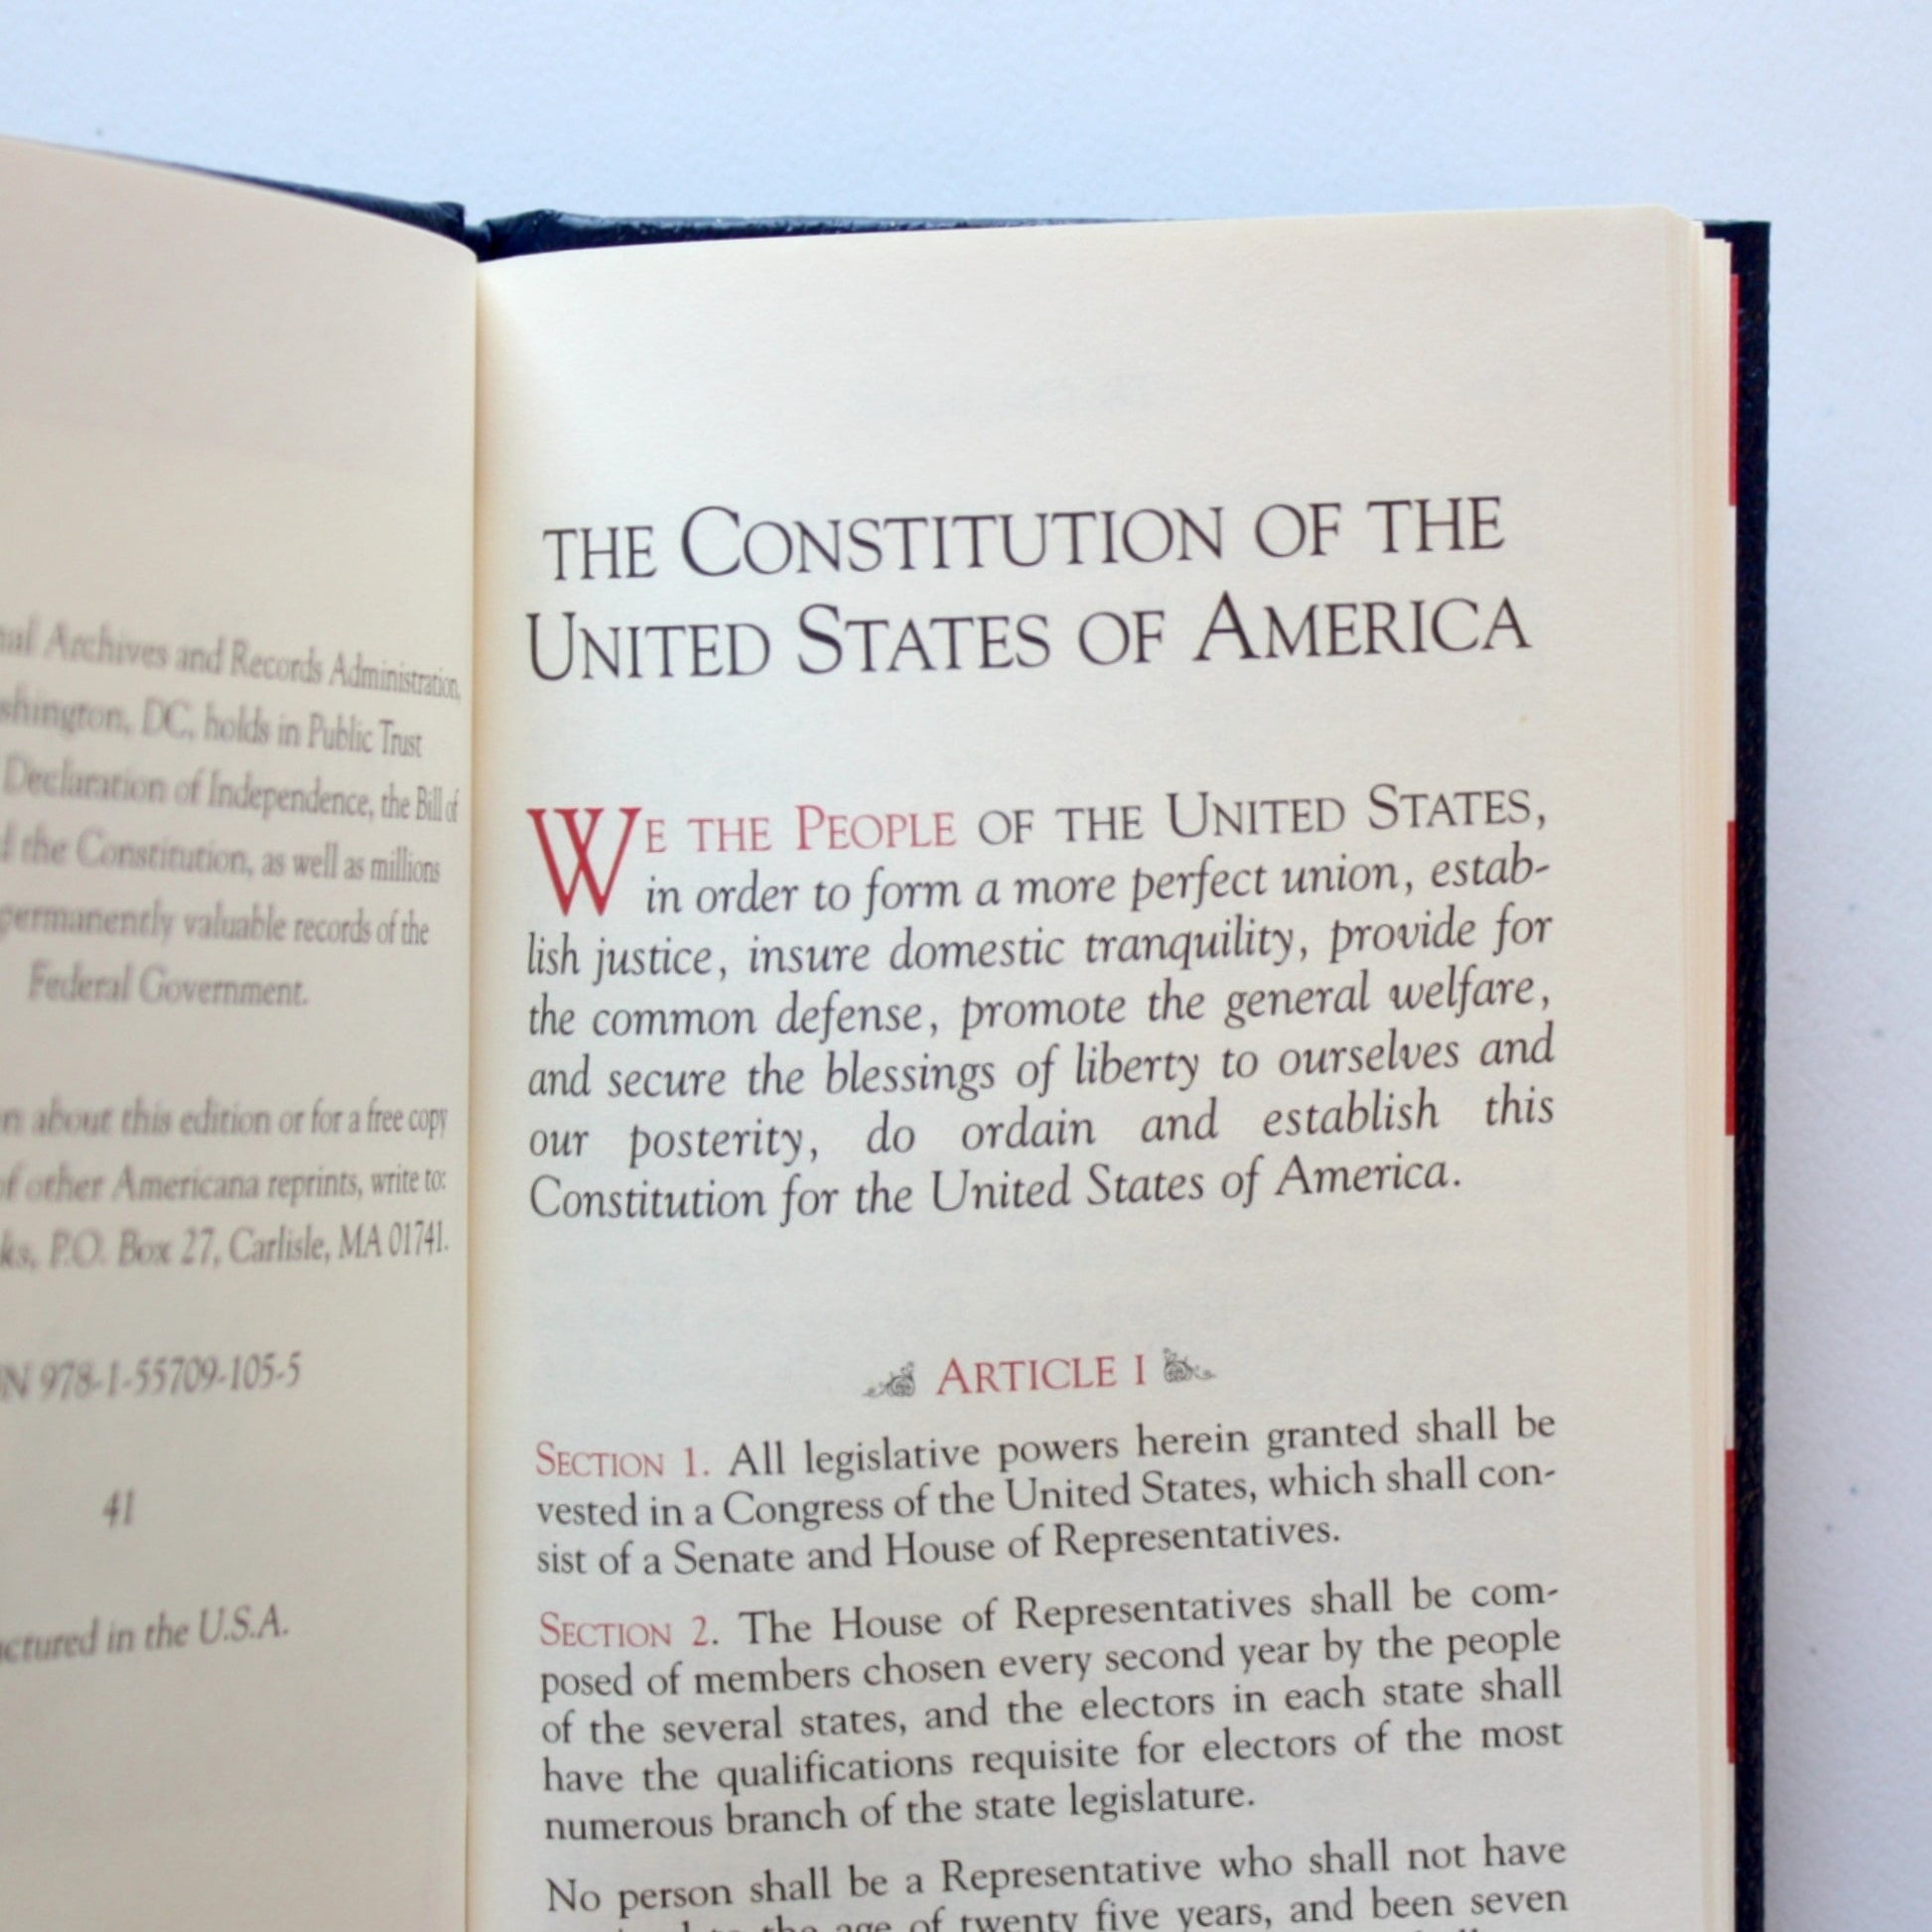 Constitution of the United States of America - Made in the USA